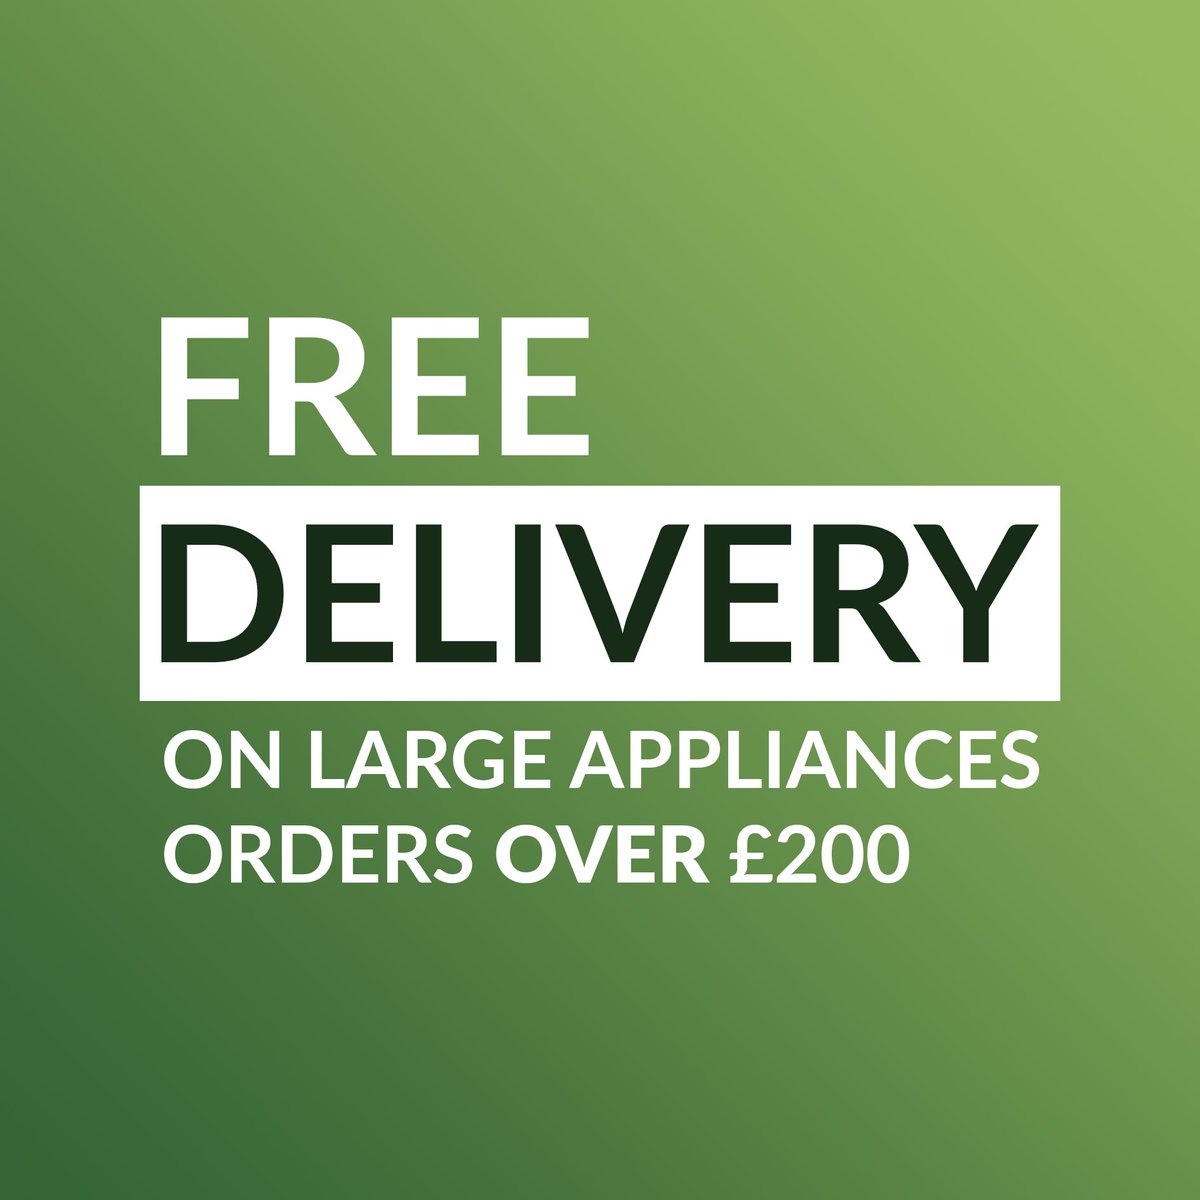 Don't miss out on the opportunity to enjoy free delivery on large appliances over £200 this Easter weekend! Hurry, this special offer ends on Monday 1st April! Shop Here: buff.ly/40sBuLX